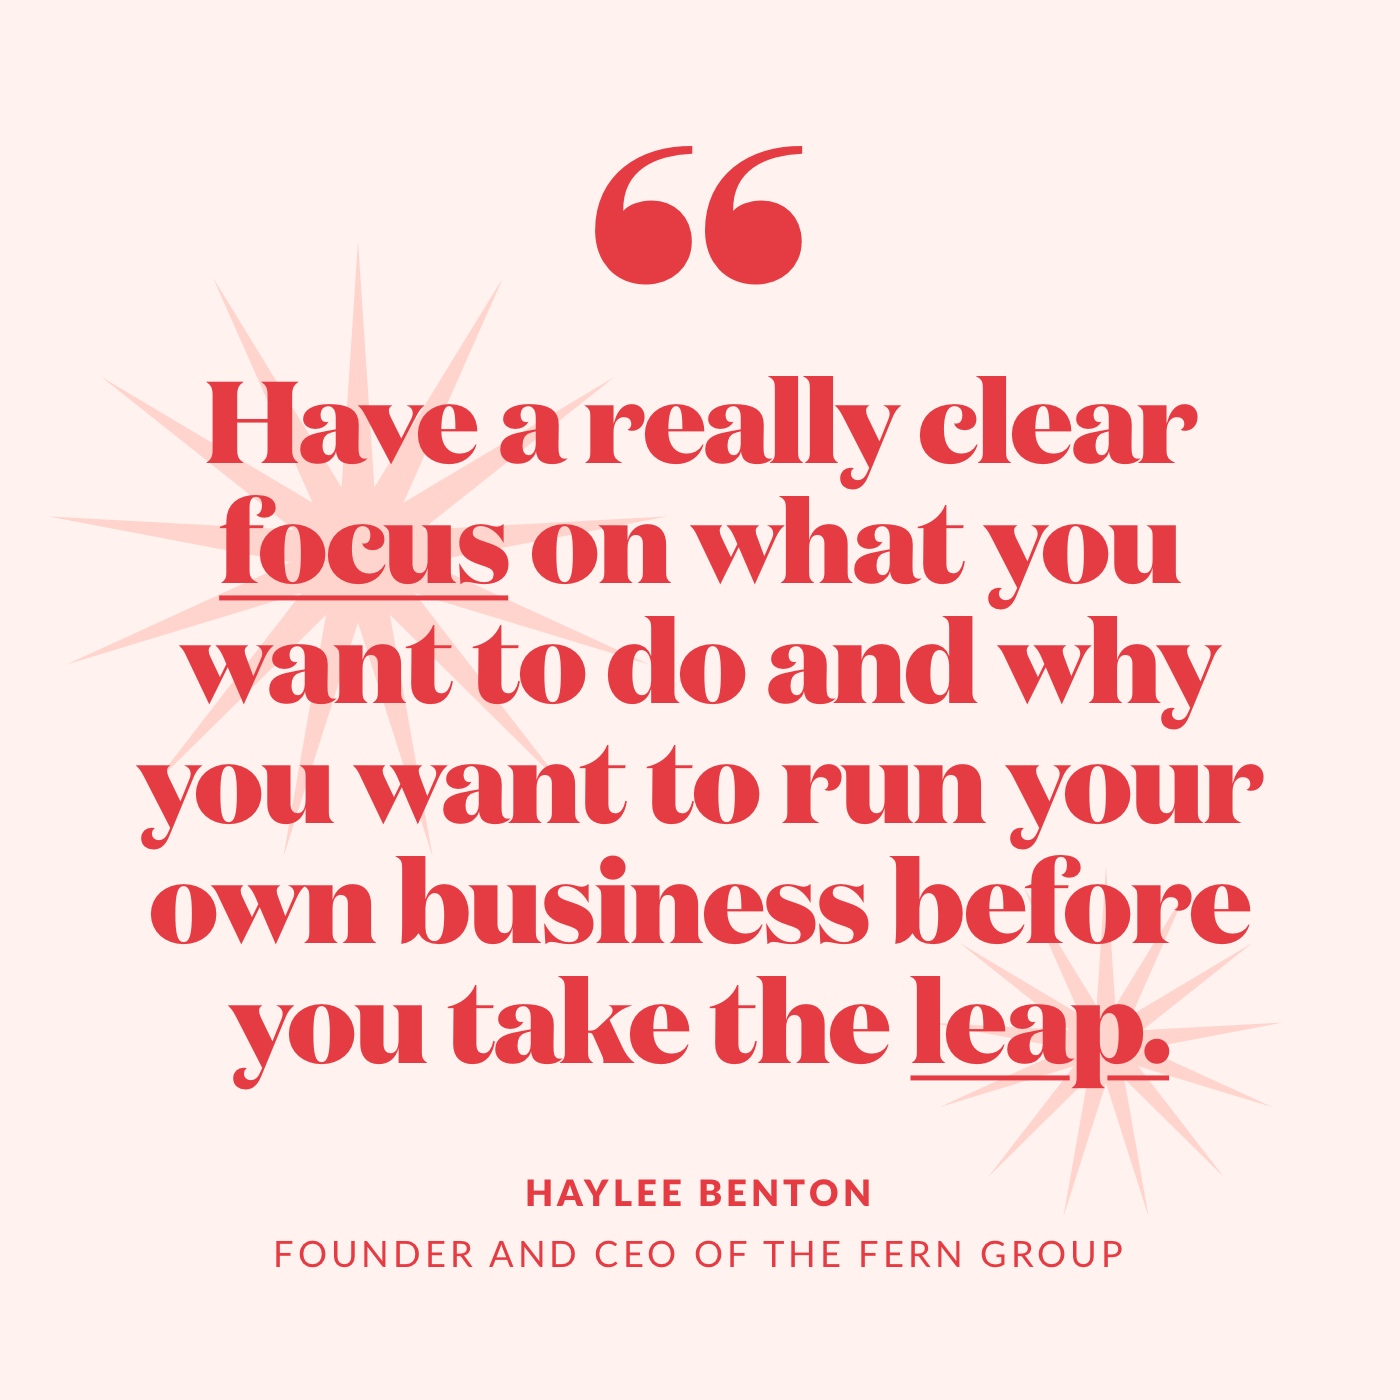 have a really clear focus on what you want to do and why you want to run your own business before you take the leap.